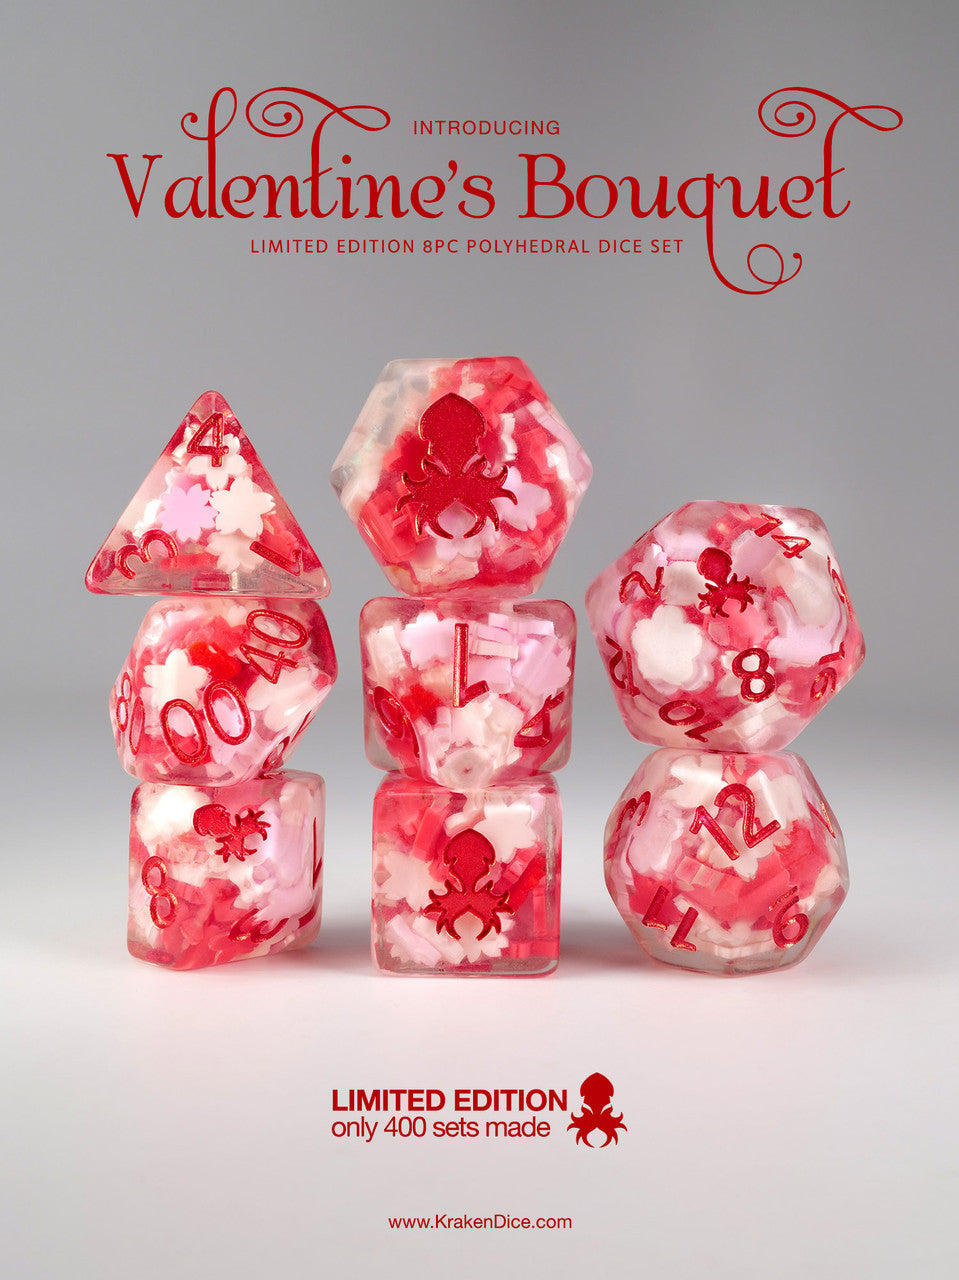 Valentine Bouquet Limited Edition 8pc Polyhedral Dice Set